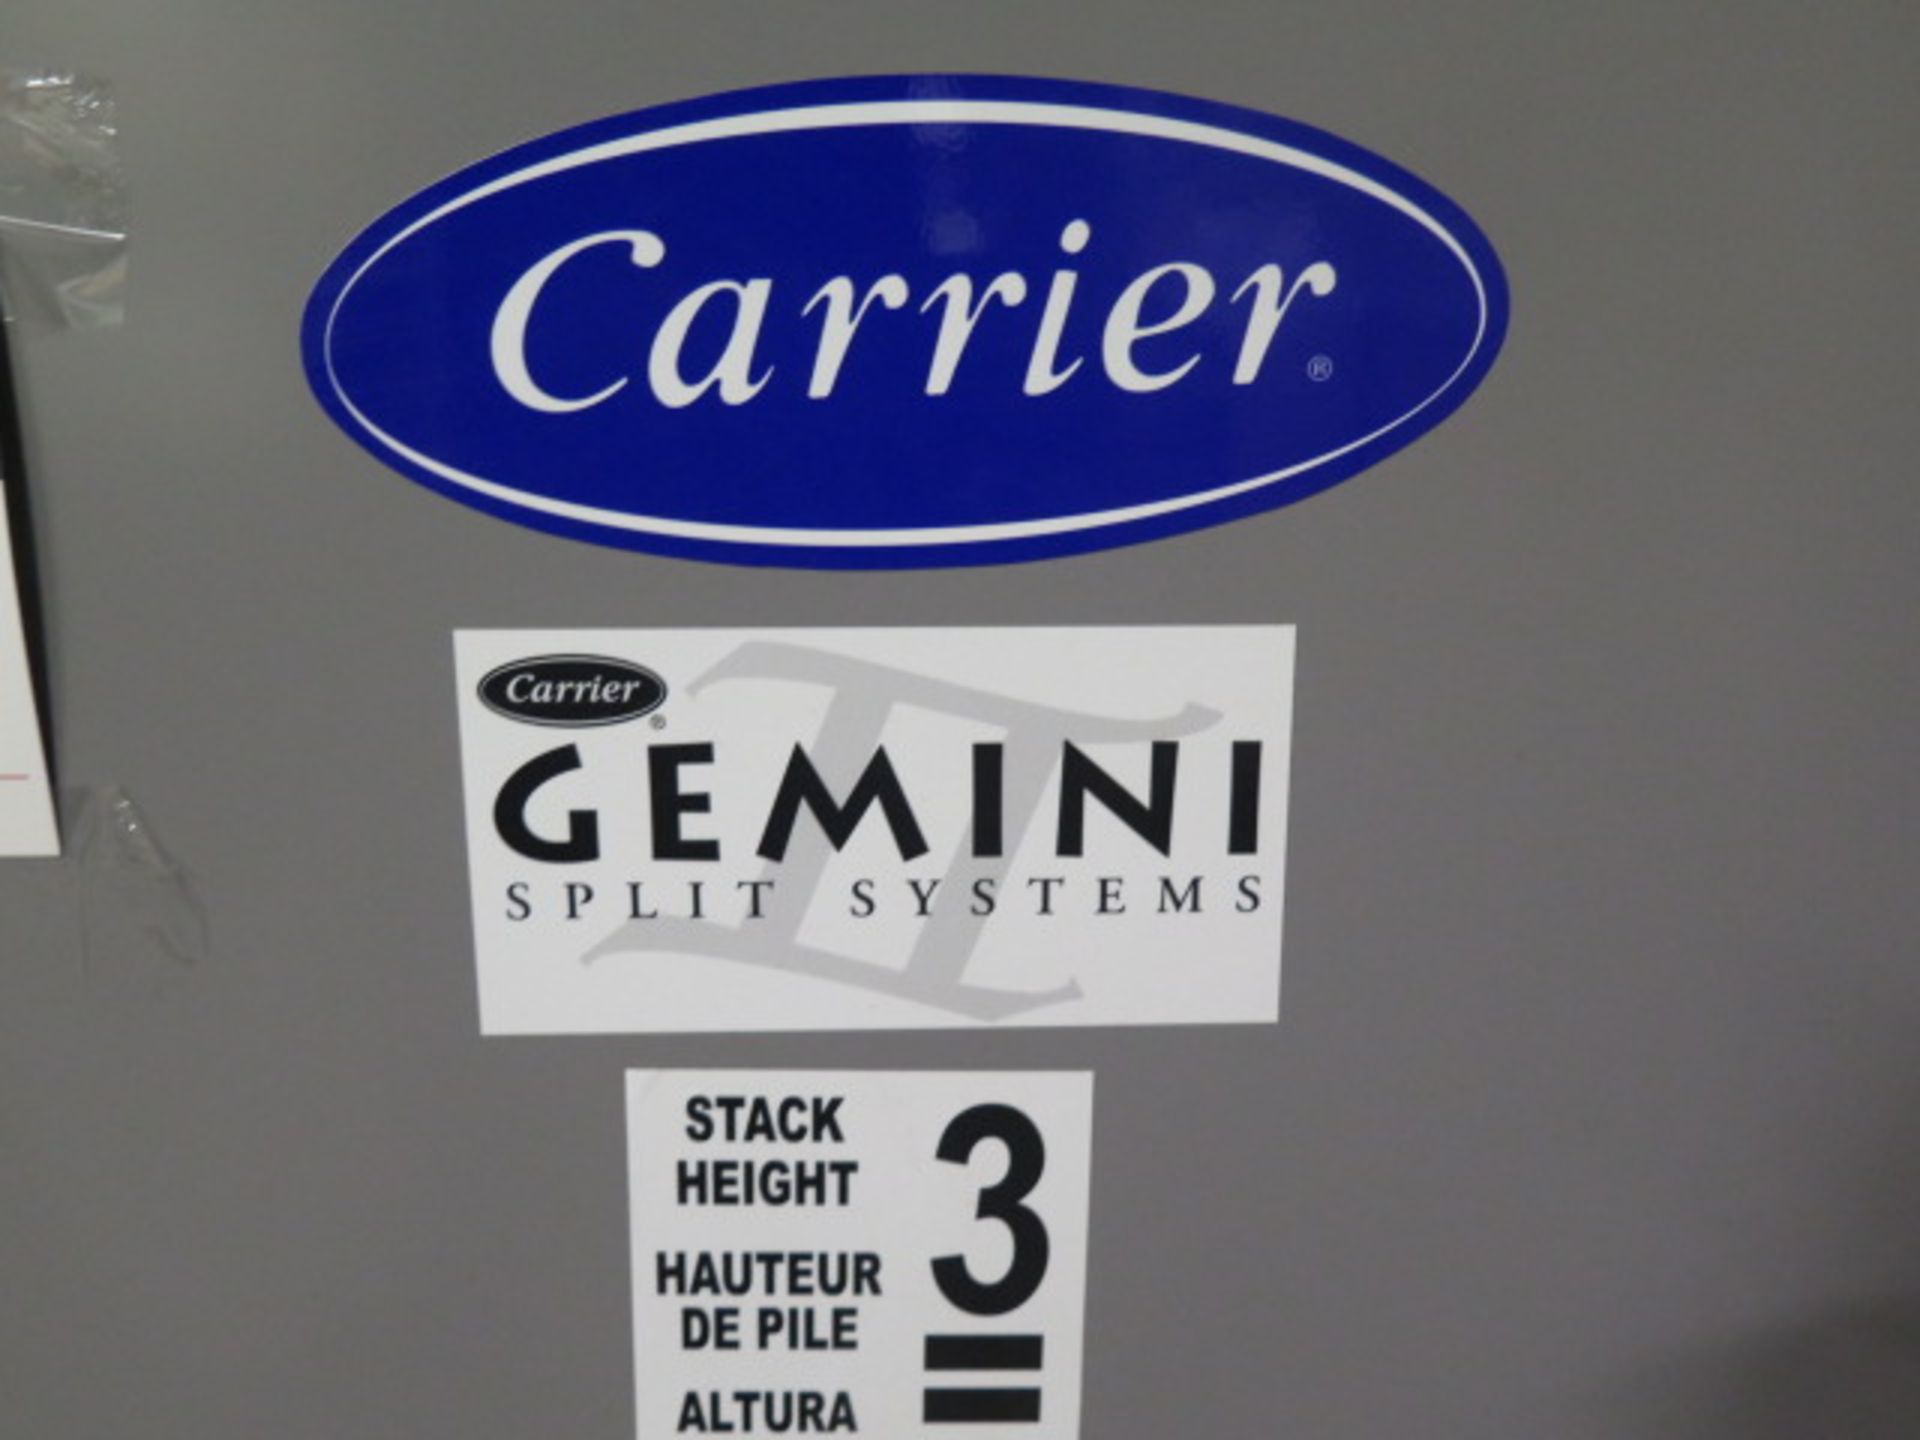 Carrier “Gemini Split Systems” 38AUQA07A0A5-0A0A0 6 Ton Dual Voltage Heat Pump Air Conditioners, - Image 5 of 8